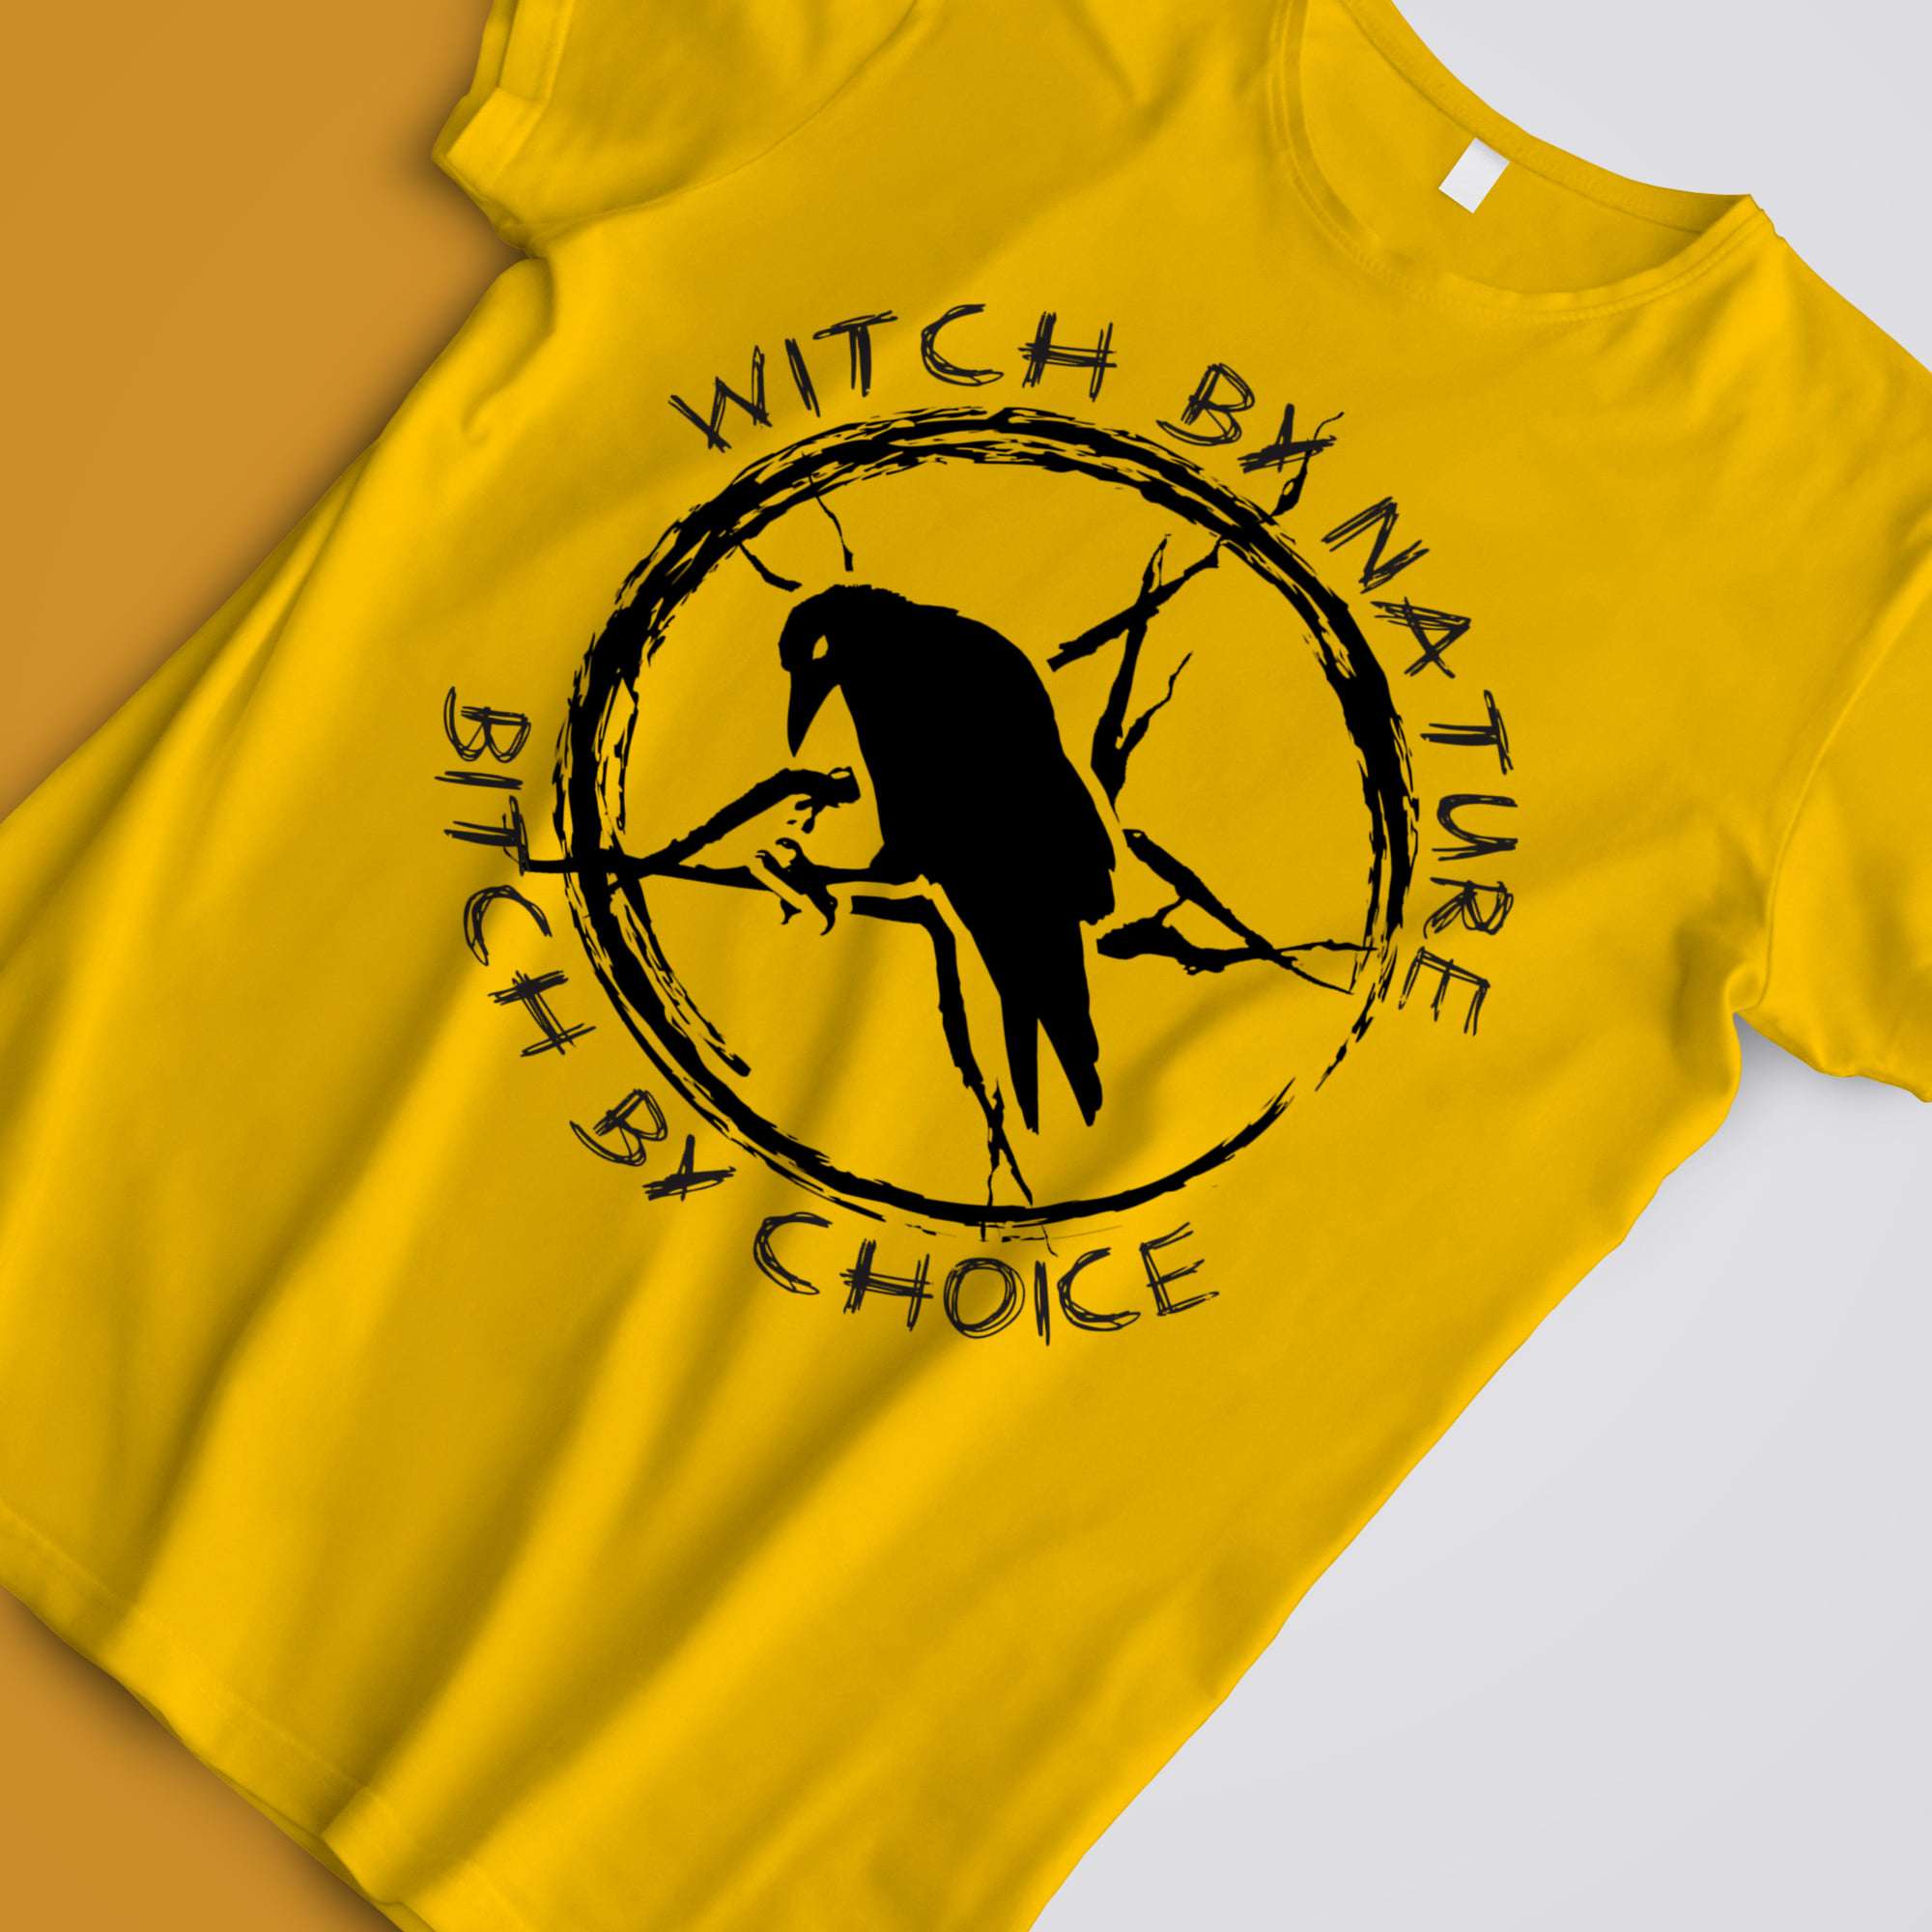 Black Crows - Witch by nature bitch by choice